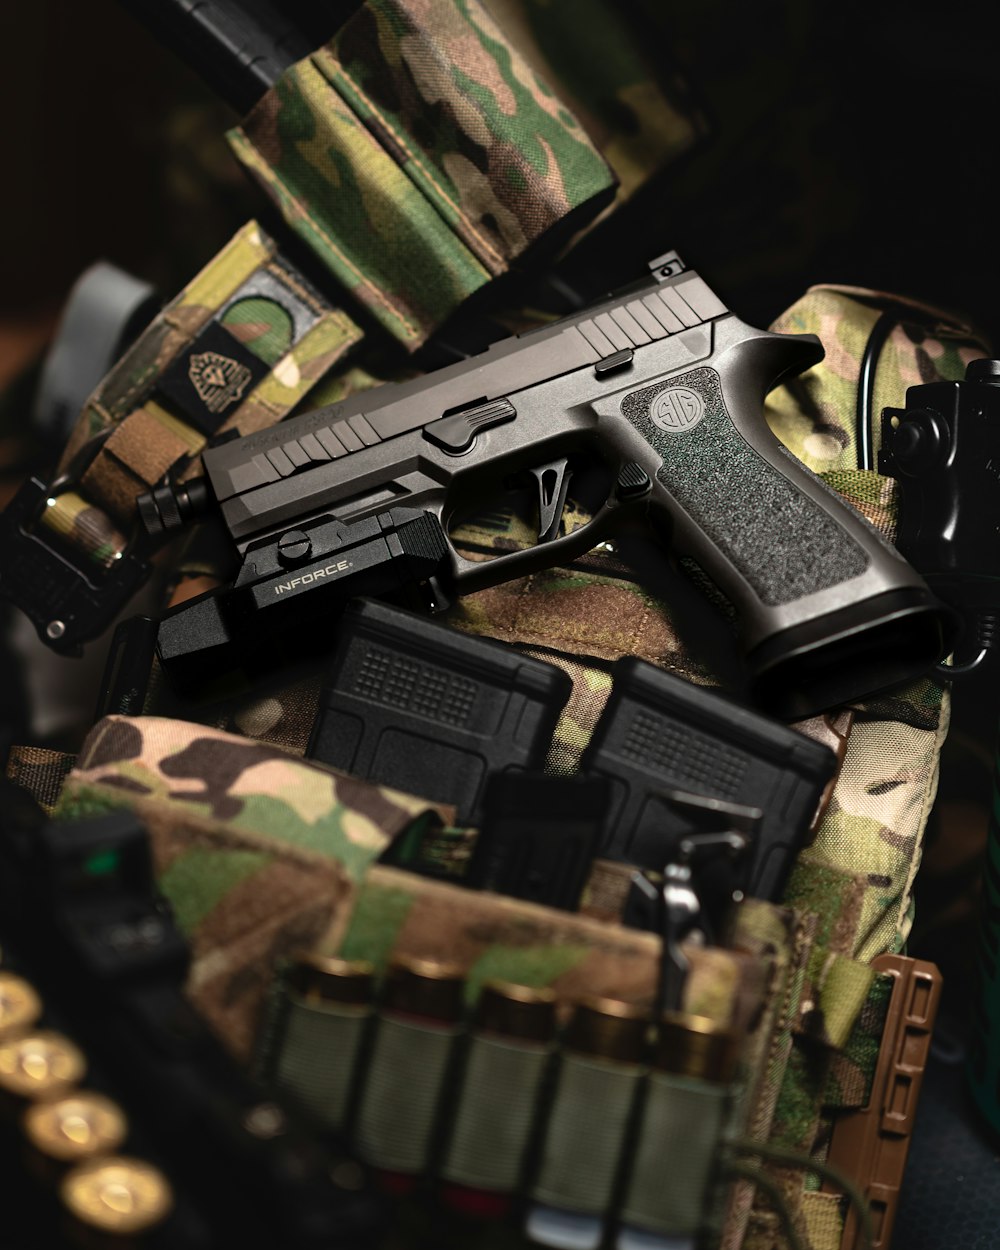 a close up of a gun on a camouflage bag